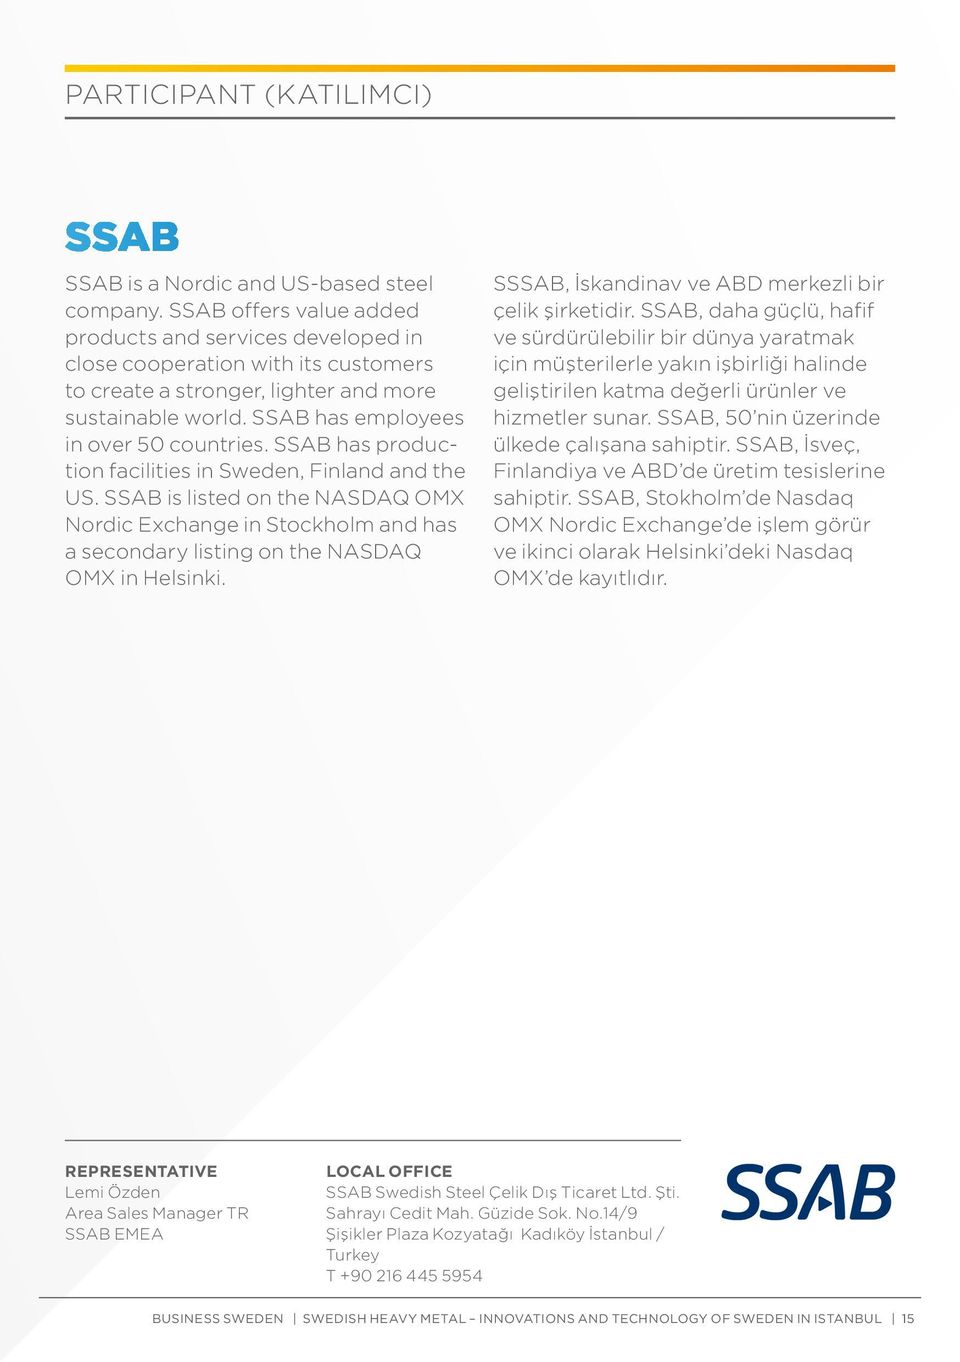 SSAB has production facilities in Sweden, Finland and the US. SSAB is listed on the NASDAQ OMX Nordic Exchange in Stockholm and has a secondary listing on the NASDAQ OMX in Helsinki.